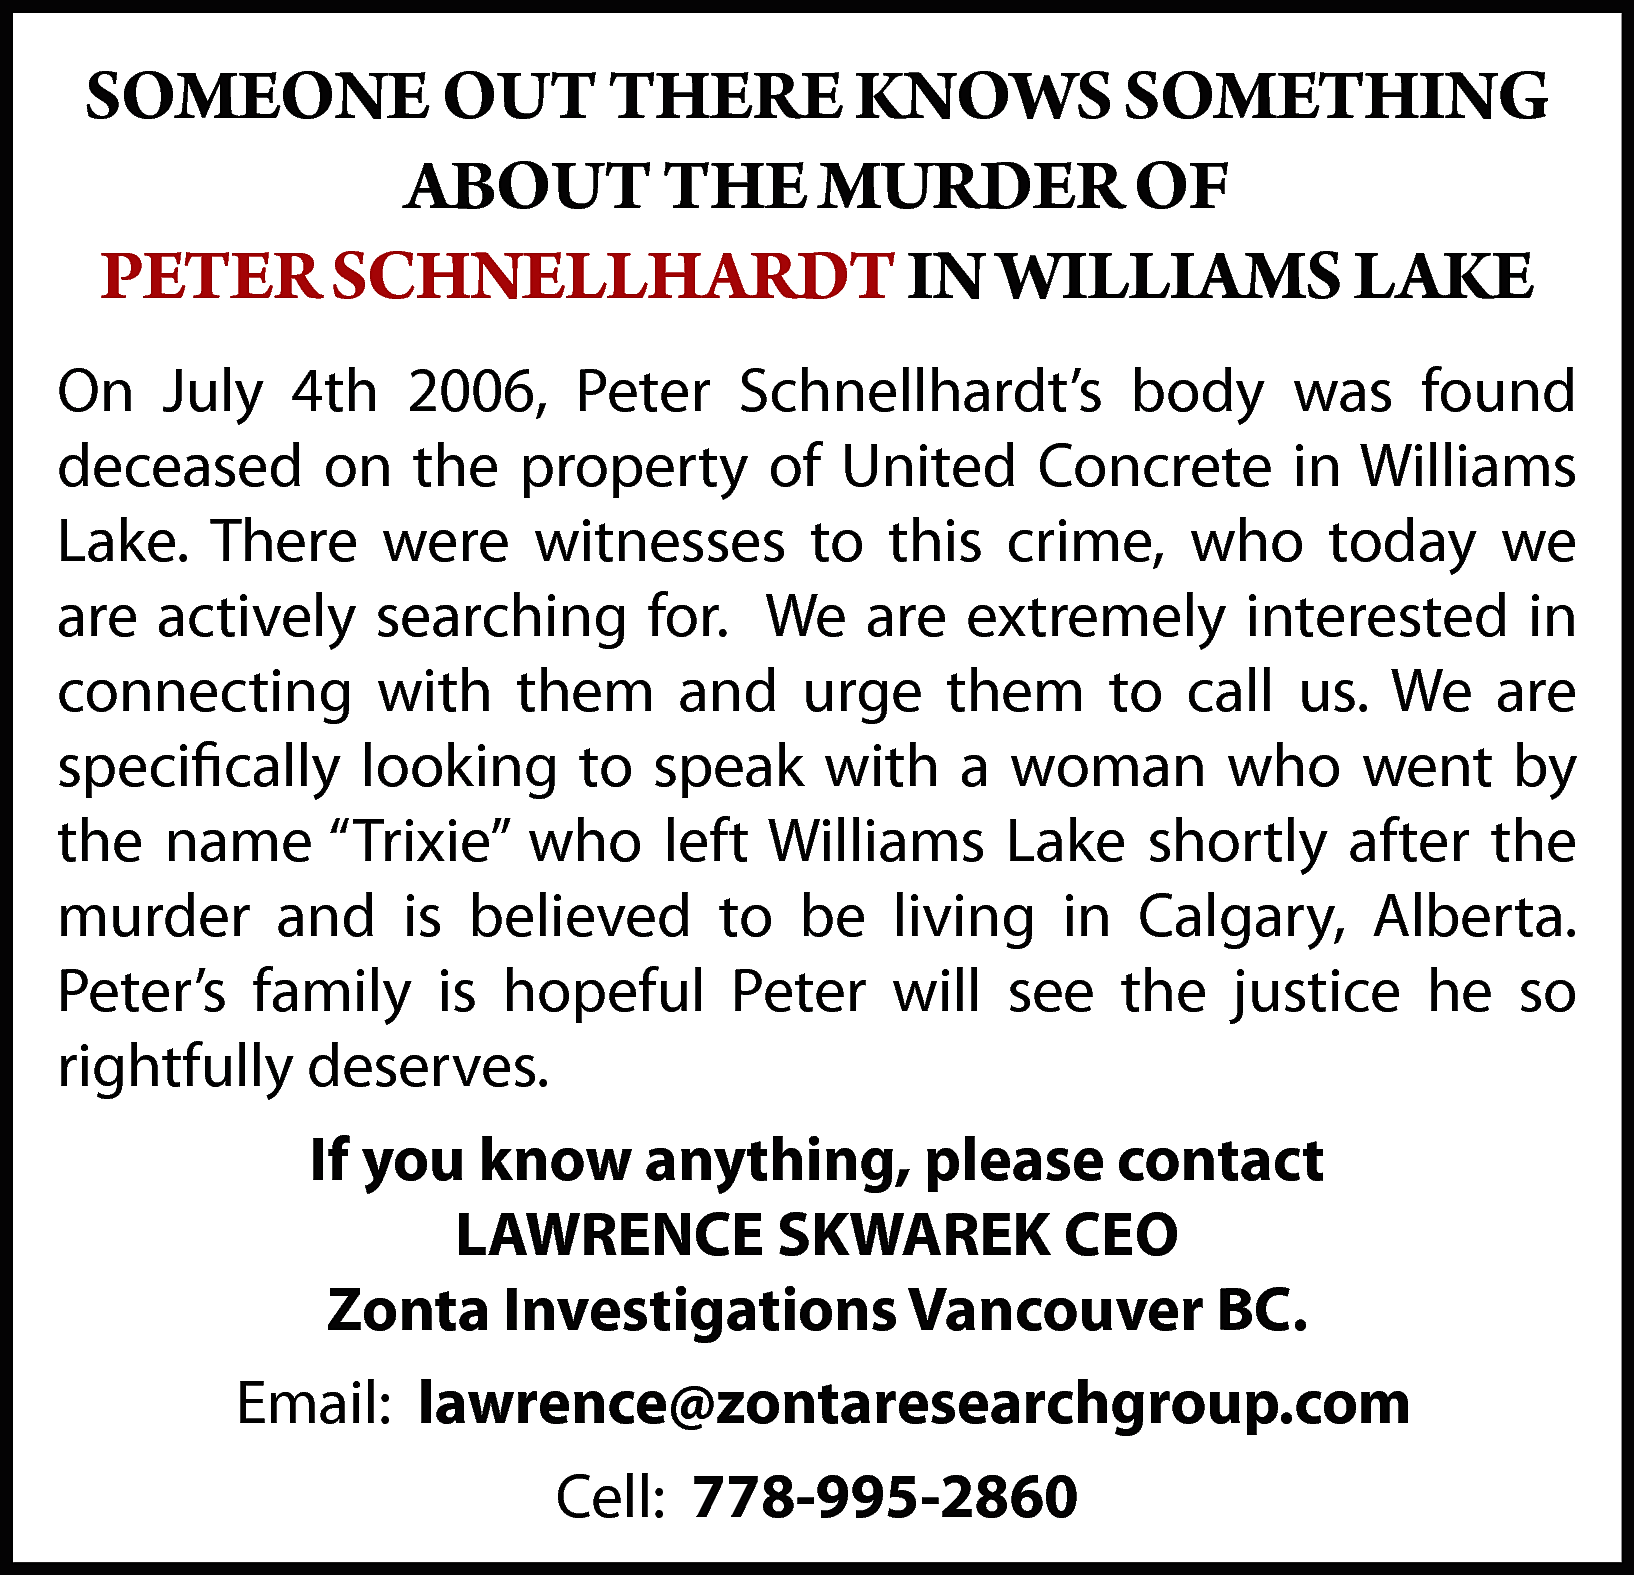 SOMEONE OUT THERE KNOWS SOMETHING  SOMEONE OUT THERE KNOWS SOMETHING  ABOUT THE MURDER OF  PETER SCHNELLHARDT IN WILLIAMS LAKE  On July 4th 2006, Peter Schnellhardt’s body was found  deceased on the property of United Concrete in Williams  Lake. There were witnesses to this crime, who today we  are actively searching for. We are extremely interested in  connecting with them and urge them to call us. We are  specifically looking to speak with a woman who went by  the name “Trixie” who left Williams Lake shortly after the  murder and is believed to be living in Calgary, Alberta.  Peter’s family is hopeful Peter will see the justice he so  rightfully deserves.  If you know anything, please contact  LAWRENCE SKWAREK CEO  Zonta Investigations Vancouver BC.  Email: lawrence@zontaresearchgroup.com  Cell: 778-995-2860    